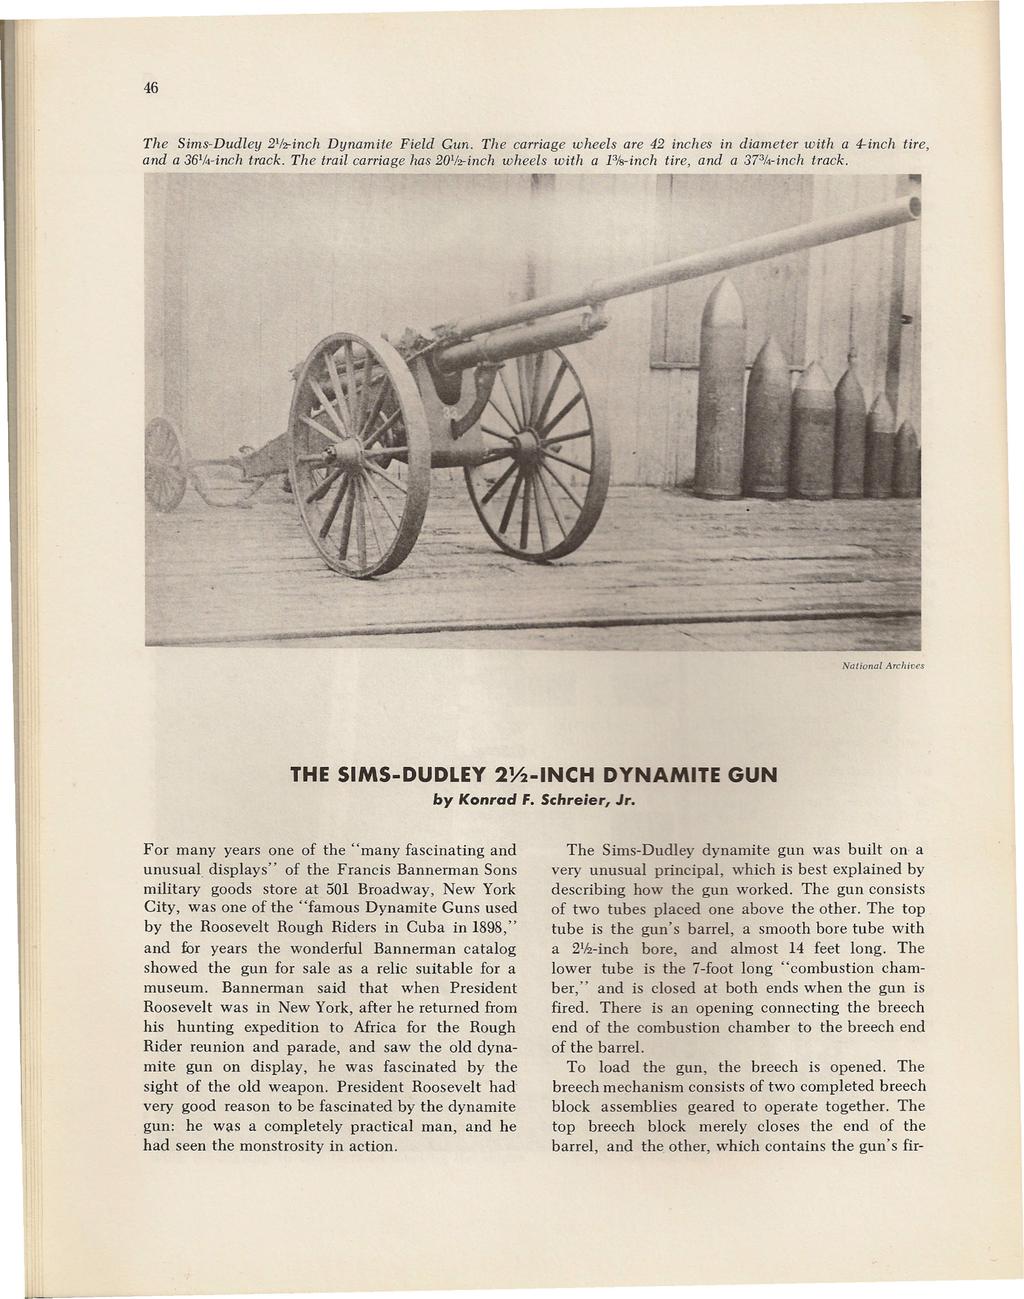 46 The Sims-Dudley 211z-inchDynamite Field Gun. The carriage wheels are 42 inches in diameter with a 4-inch tire, and a 361f4-inchtrack.